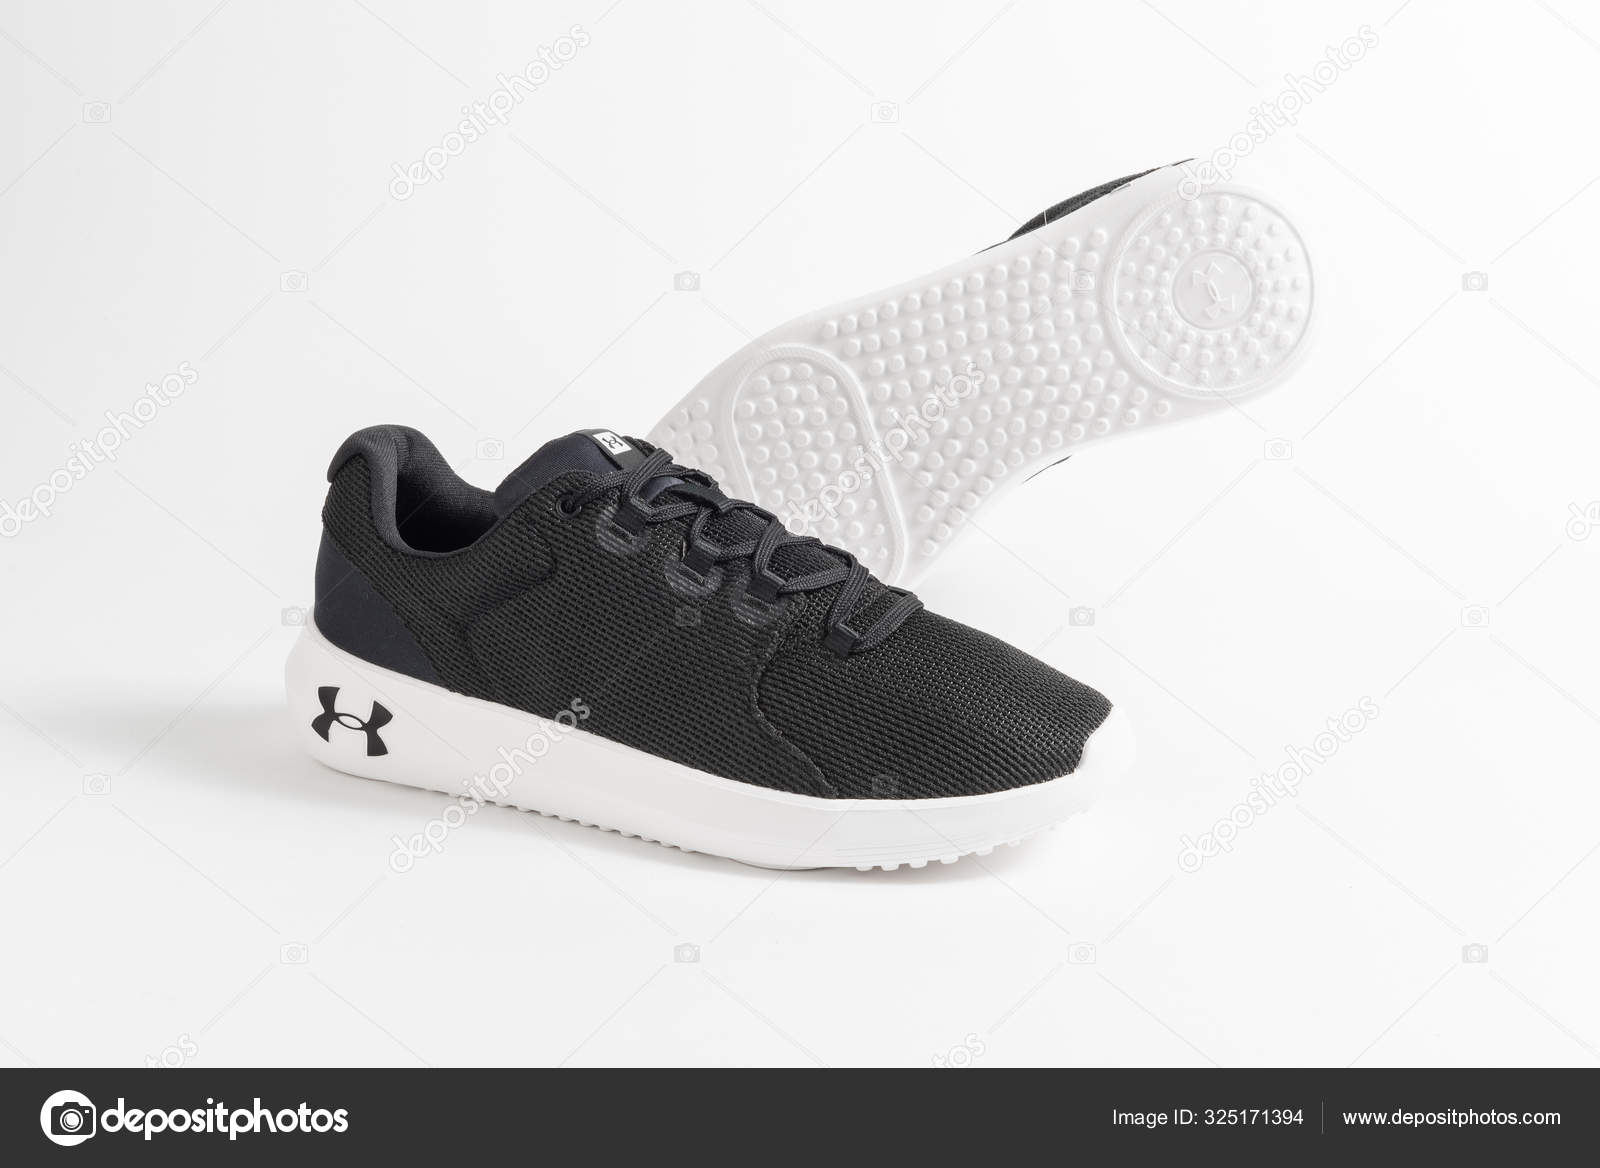 under armor black and white shoes